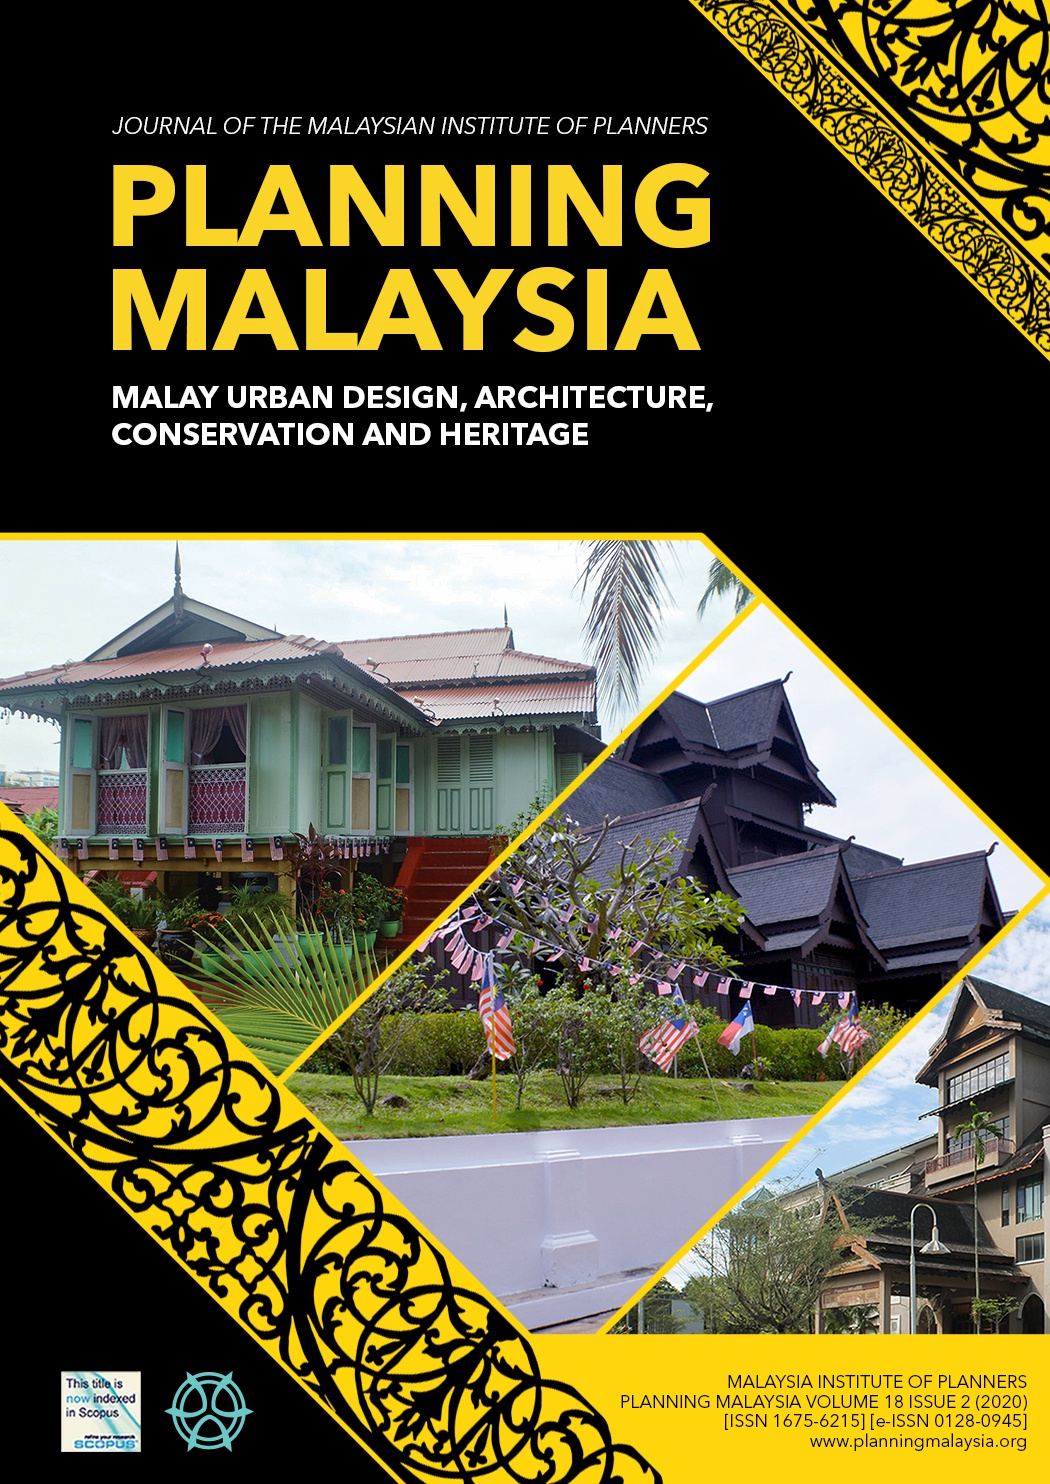 					View Vol. 18 (2020): PLANNING MALAYSIA JOURNAL : Volume 18, Issue 2, 2020
				